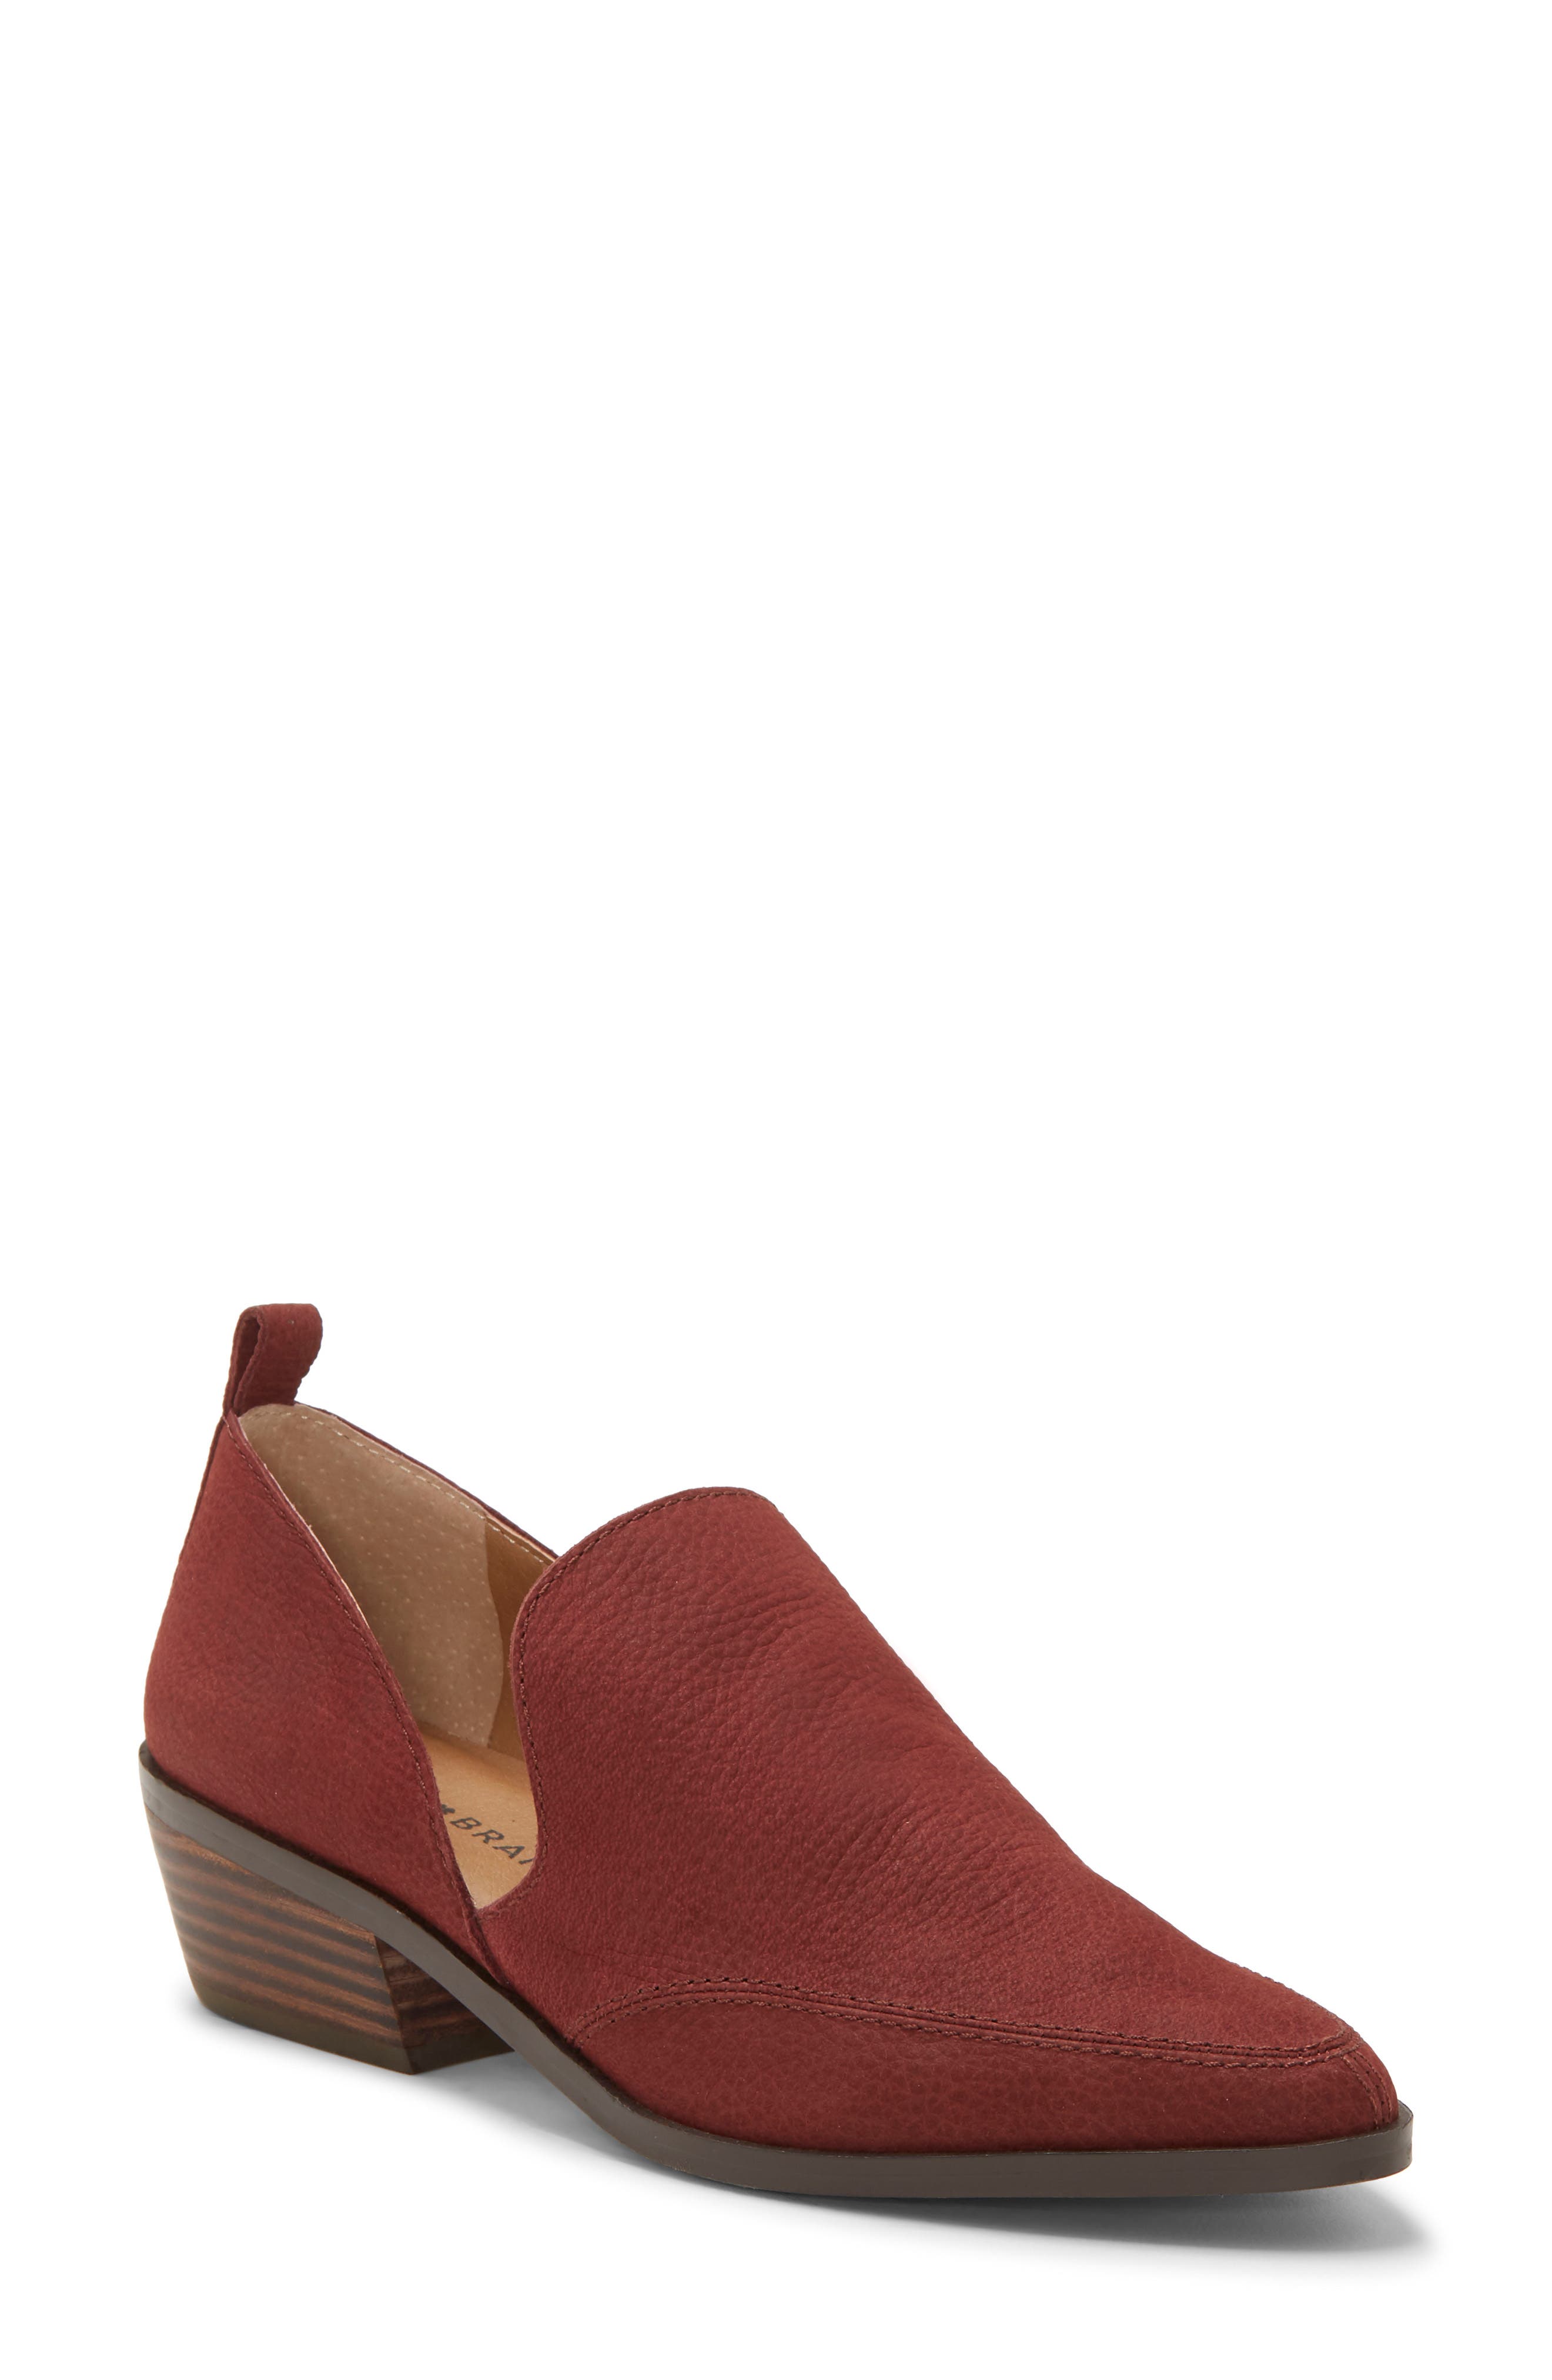 UPC 191644545672 product image for Women's Lucky Brand Mahzan Bootie, Size 8.5 M - Red | upcitemdb.com